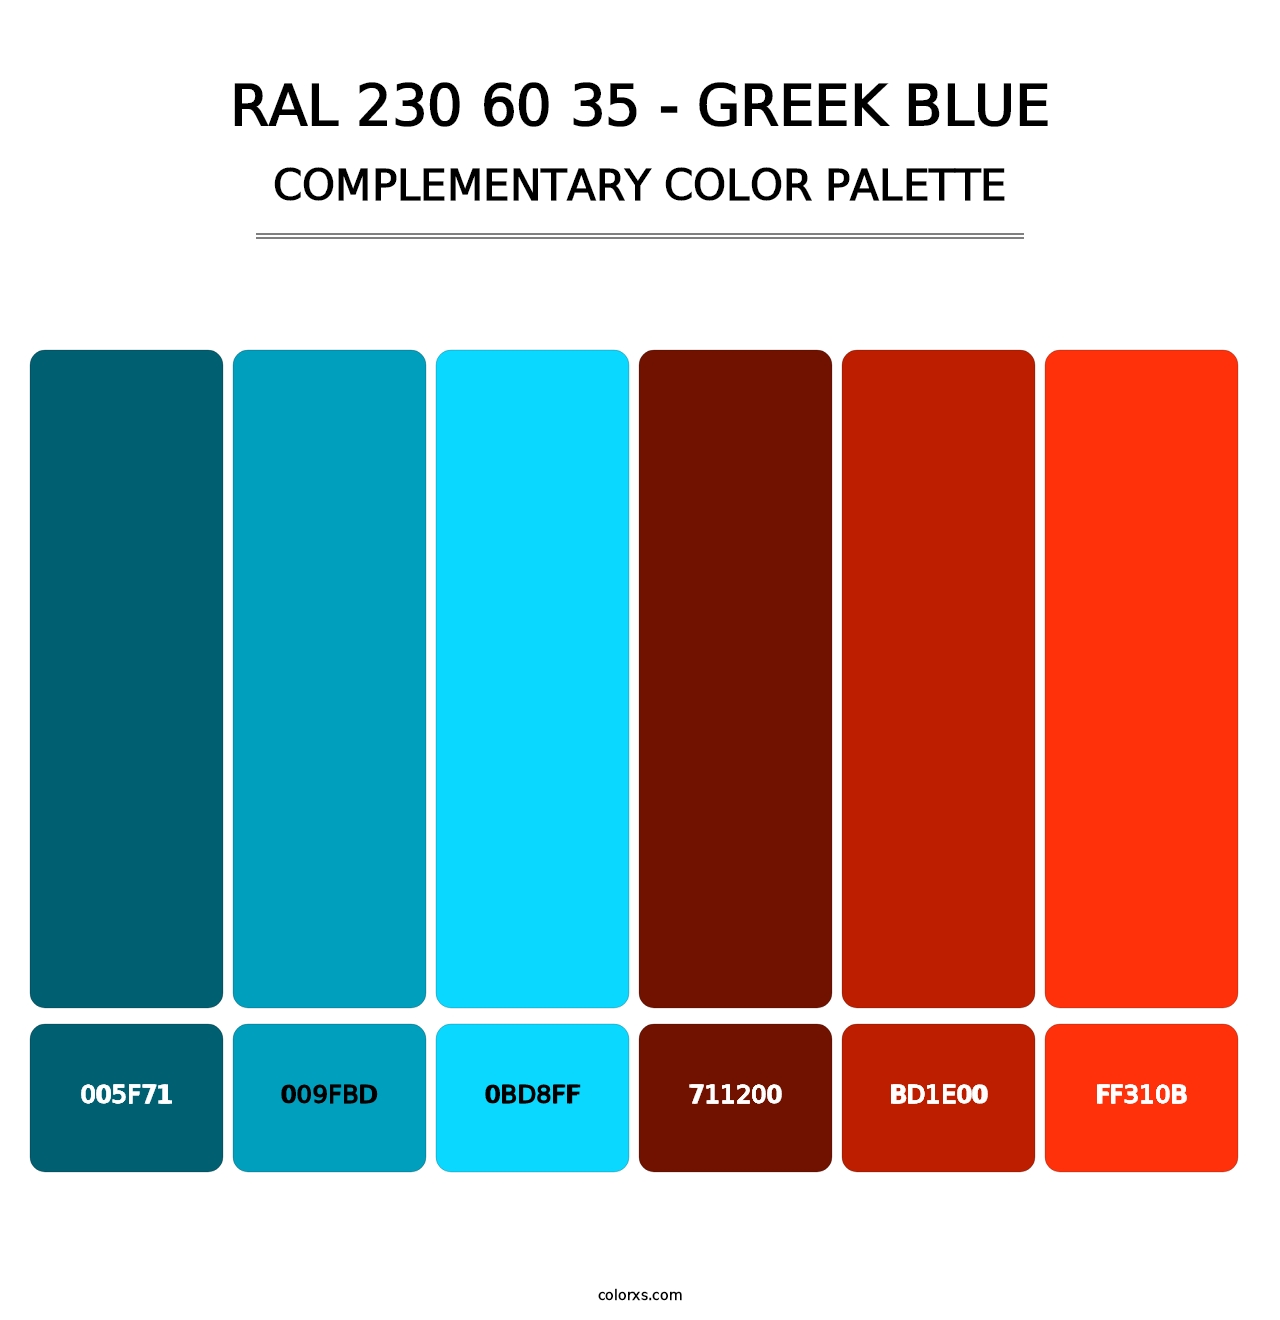 RAL 230 60 35 - Greek Blue - Complementary Color Palette